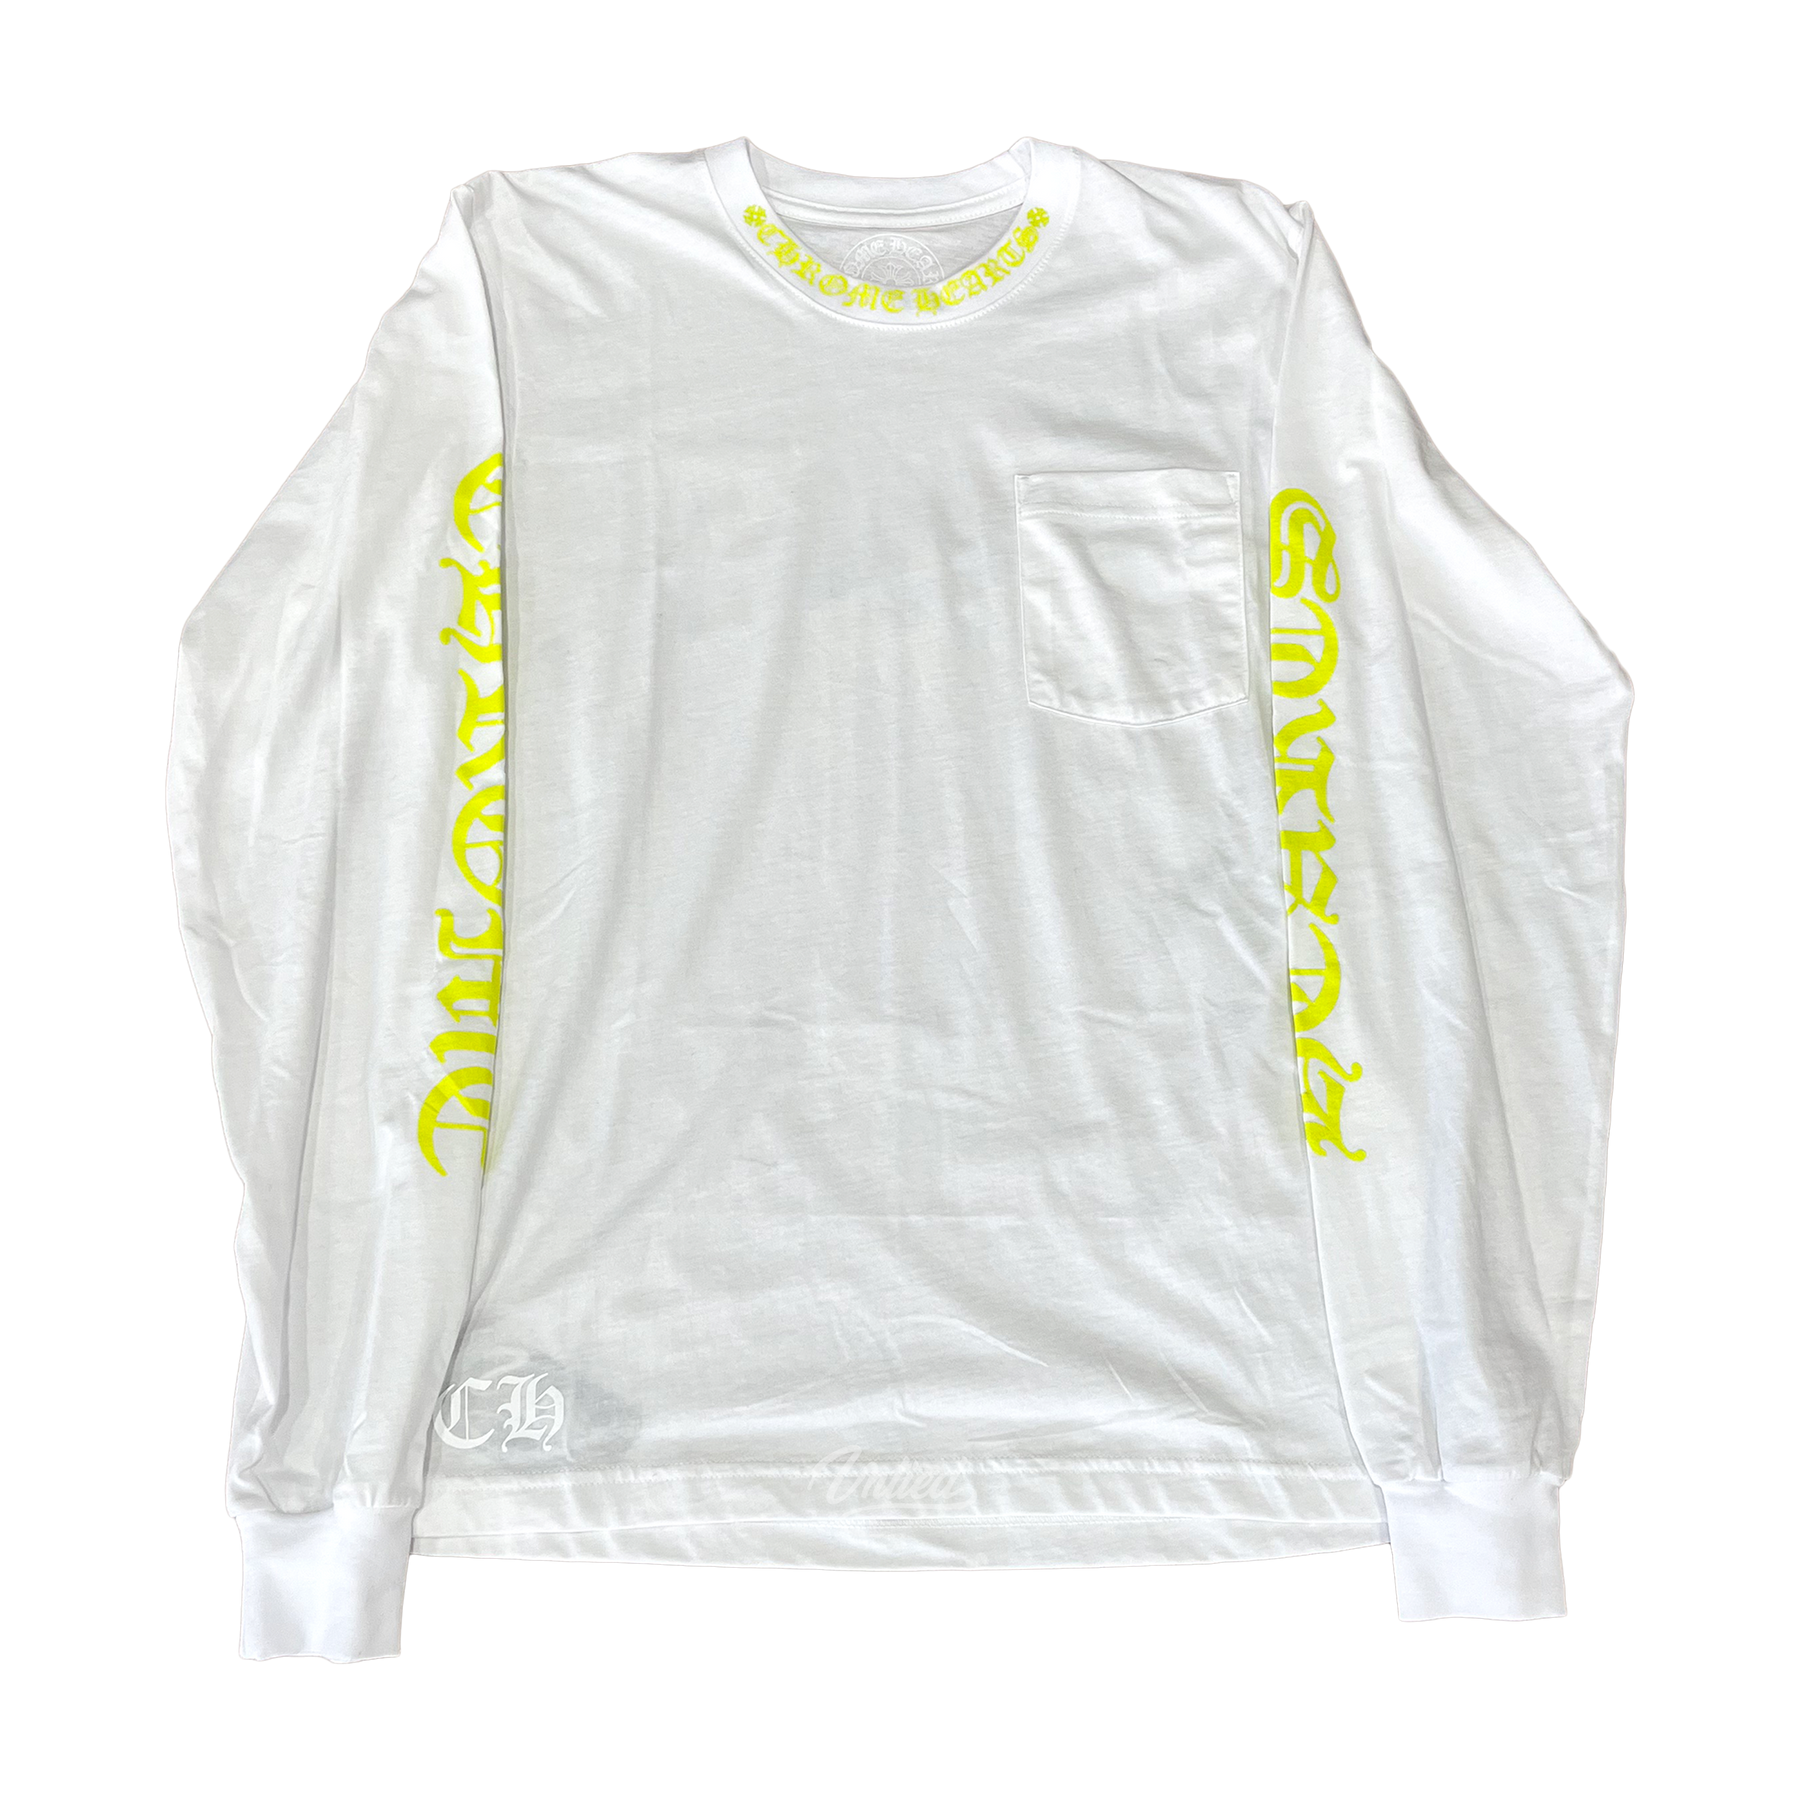 Chrome Hearts Collar L/S Tee "White/Pale Yellow"